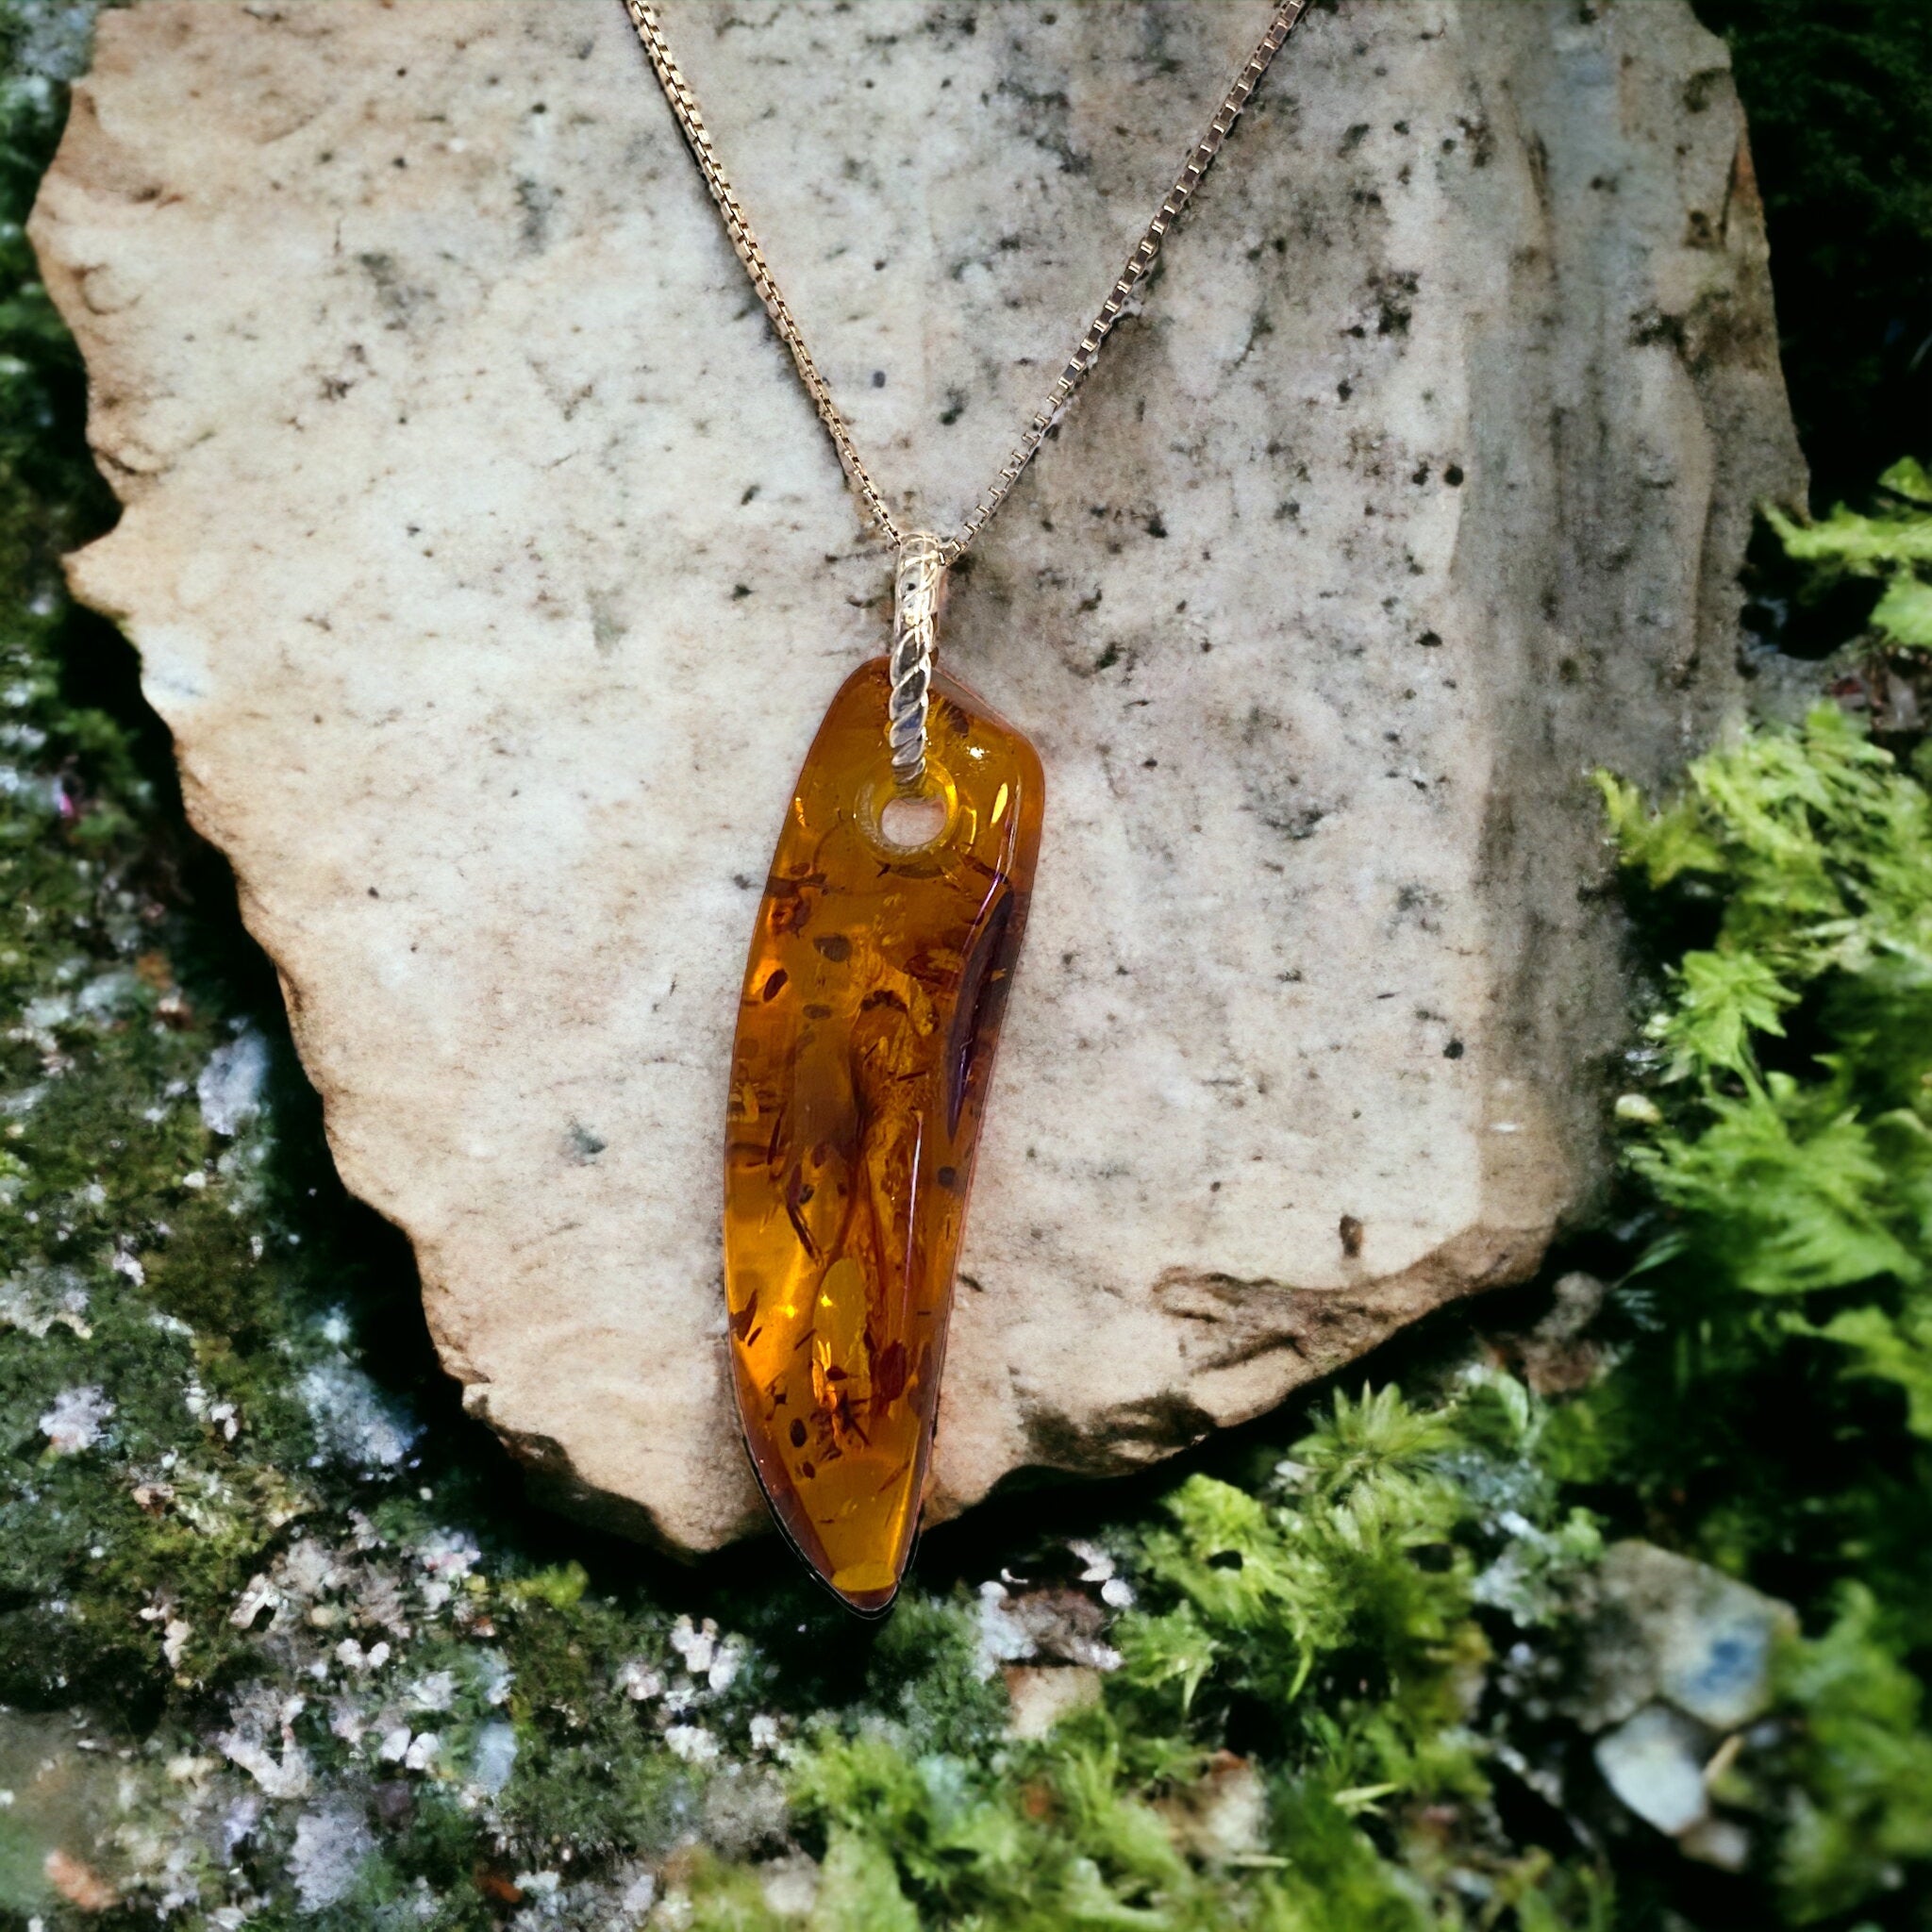 Amber Amulet Necklace - Precious Amber